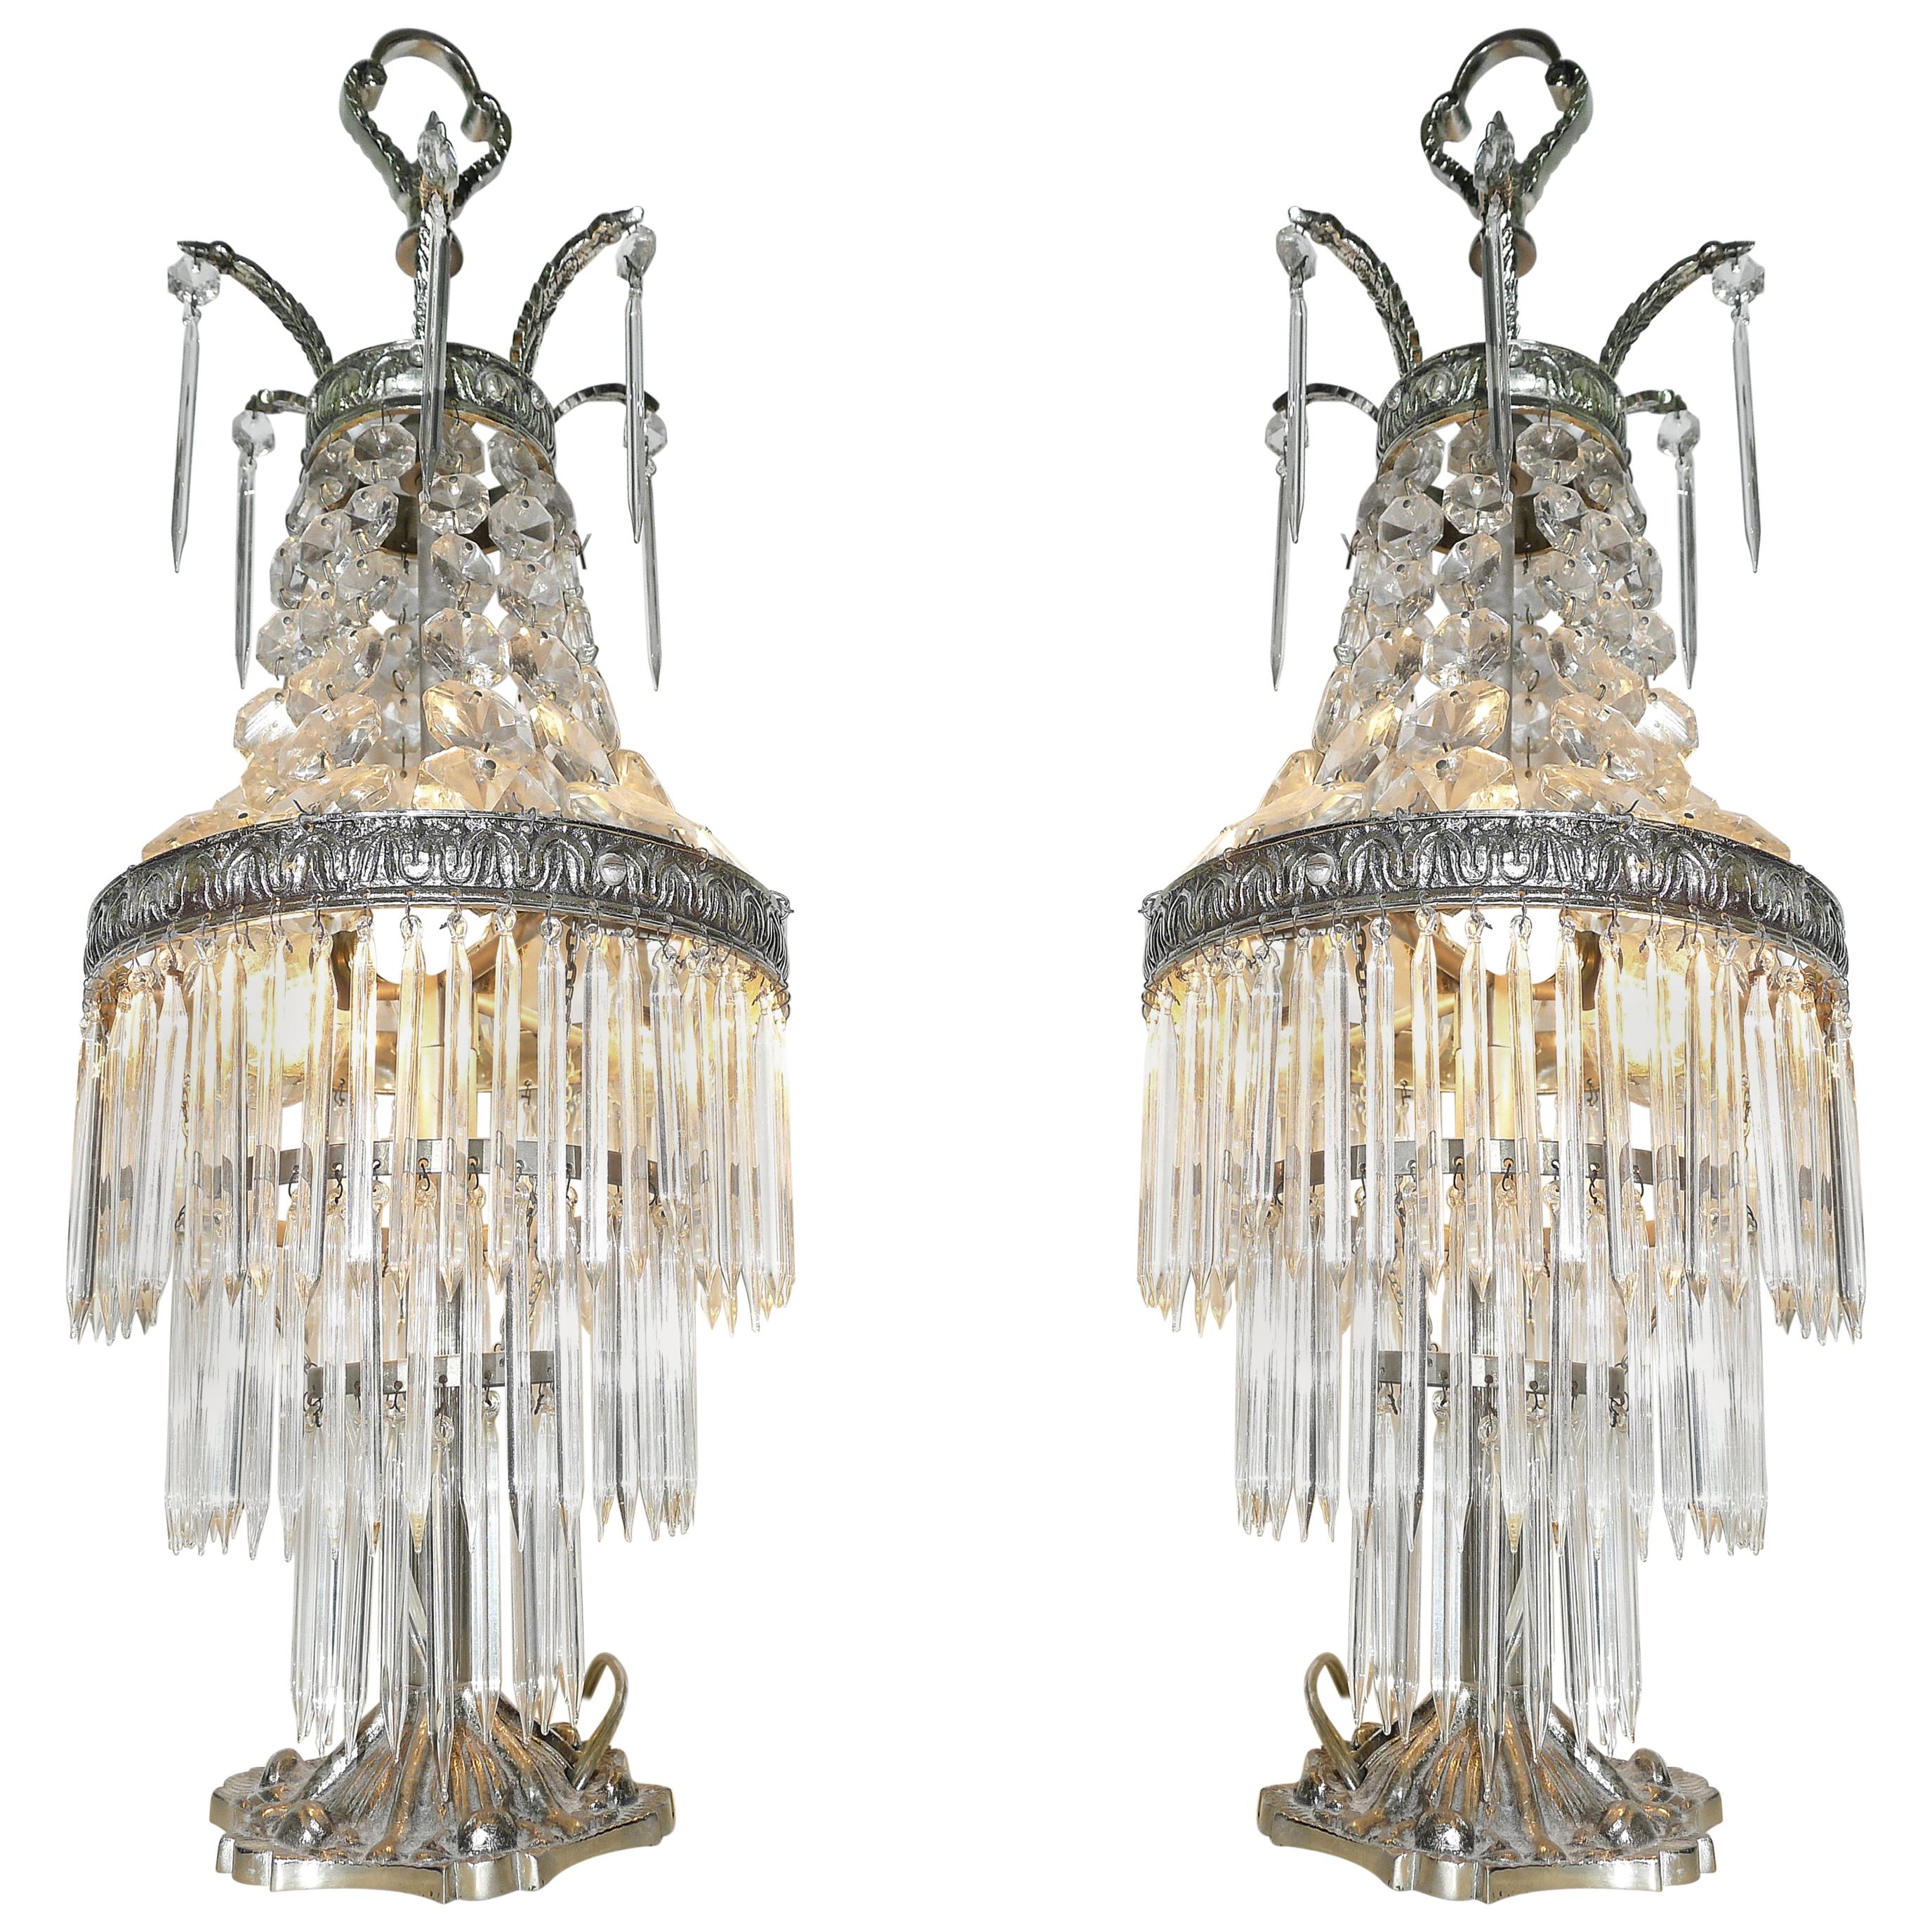 Pair of French Regency Empire in nickel and crystal table lamps. 3 tiers wedding cake.
Housing 2-light bulbs each E14. Nickel detailing with all crystal intact.
Measures:
Height 20.5 in /52 cm
Diameter 8 in /20 cm
Weight 16 lb. / 8 kg
Good working